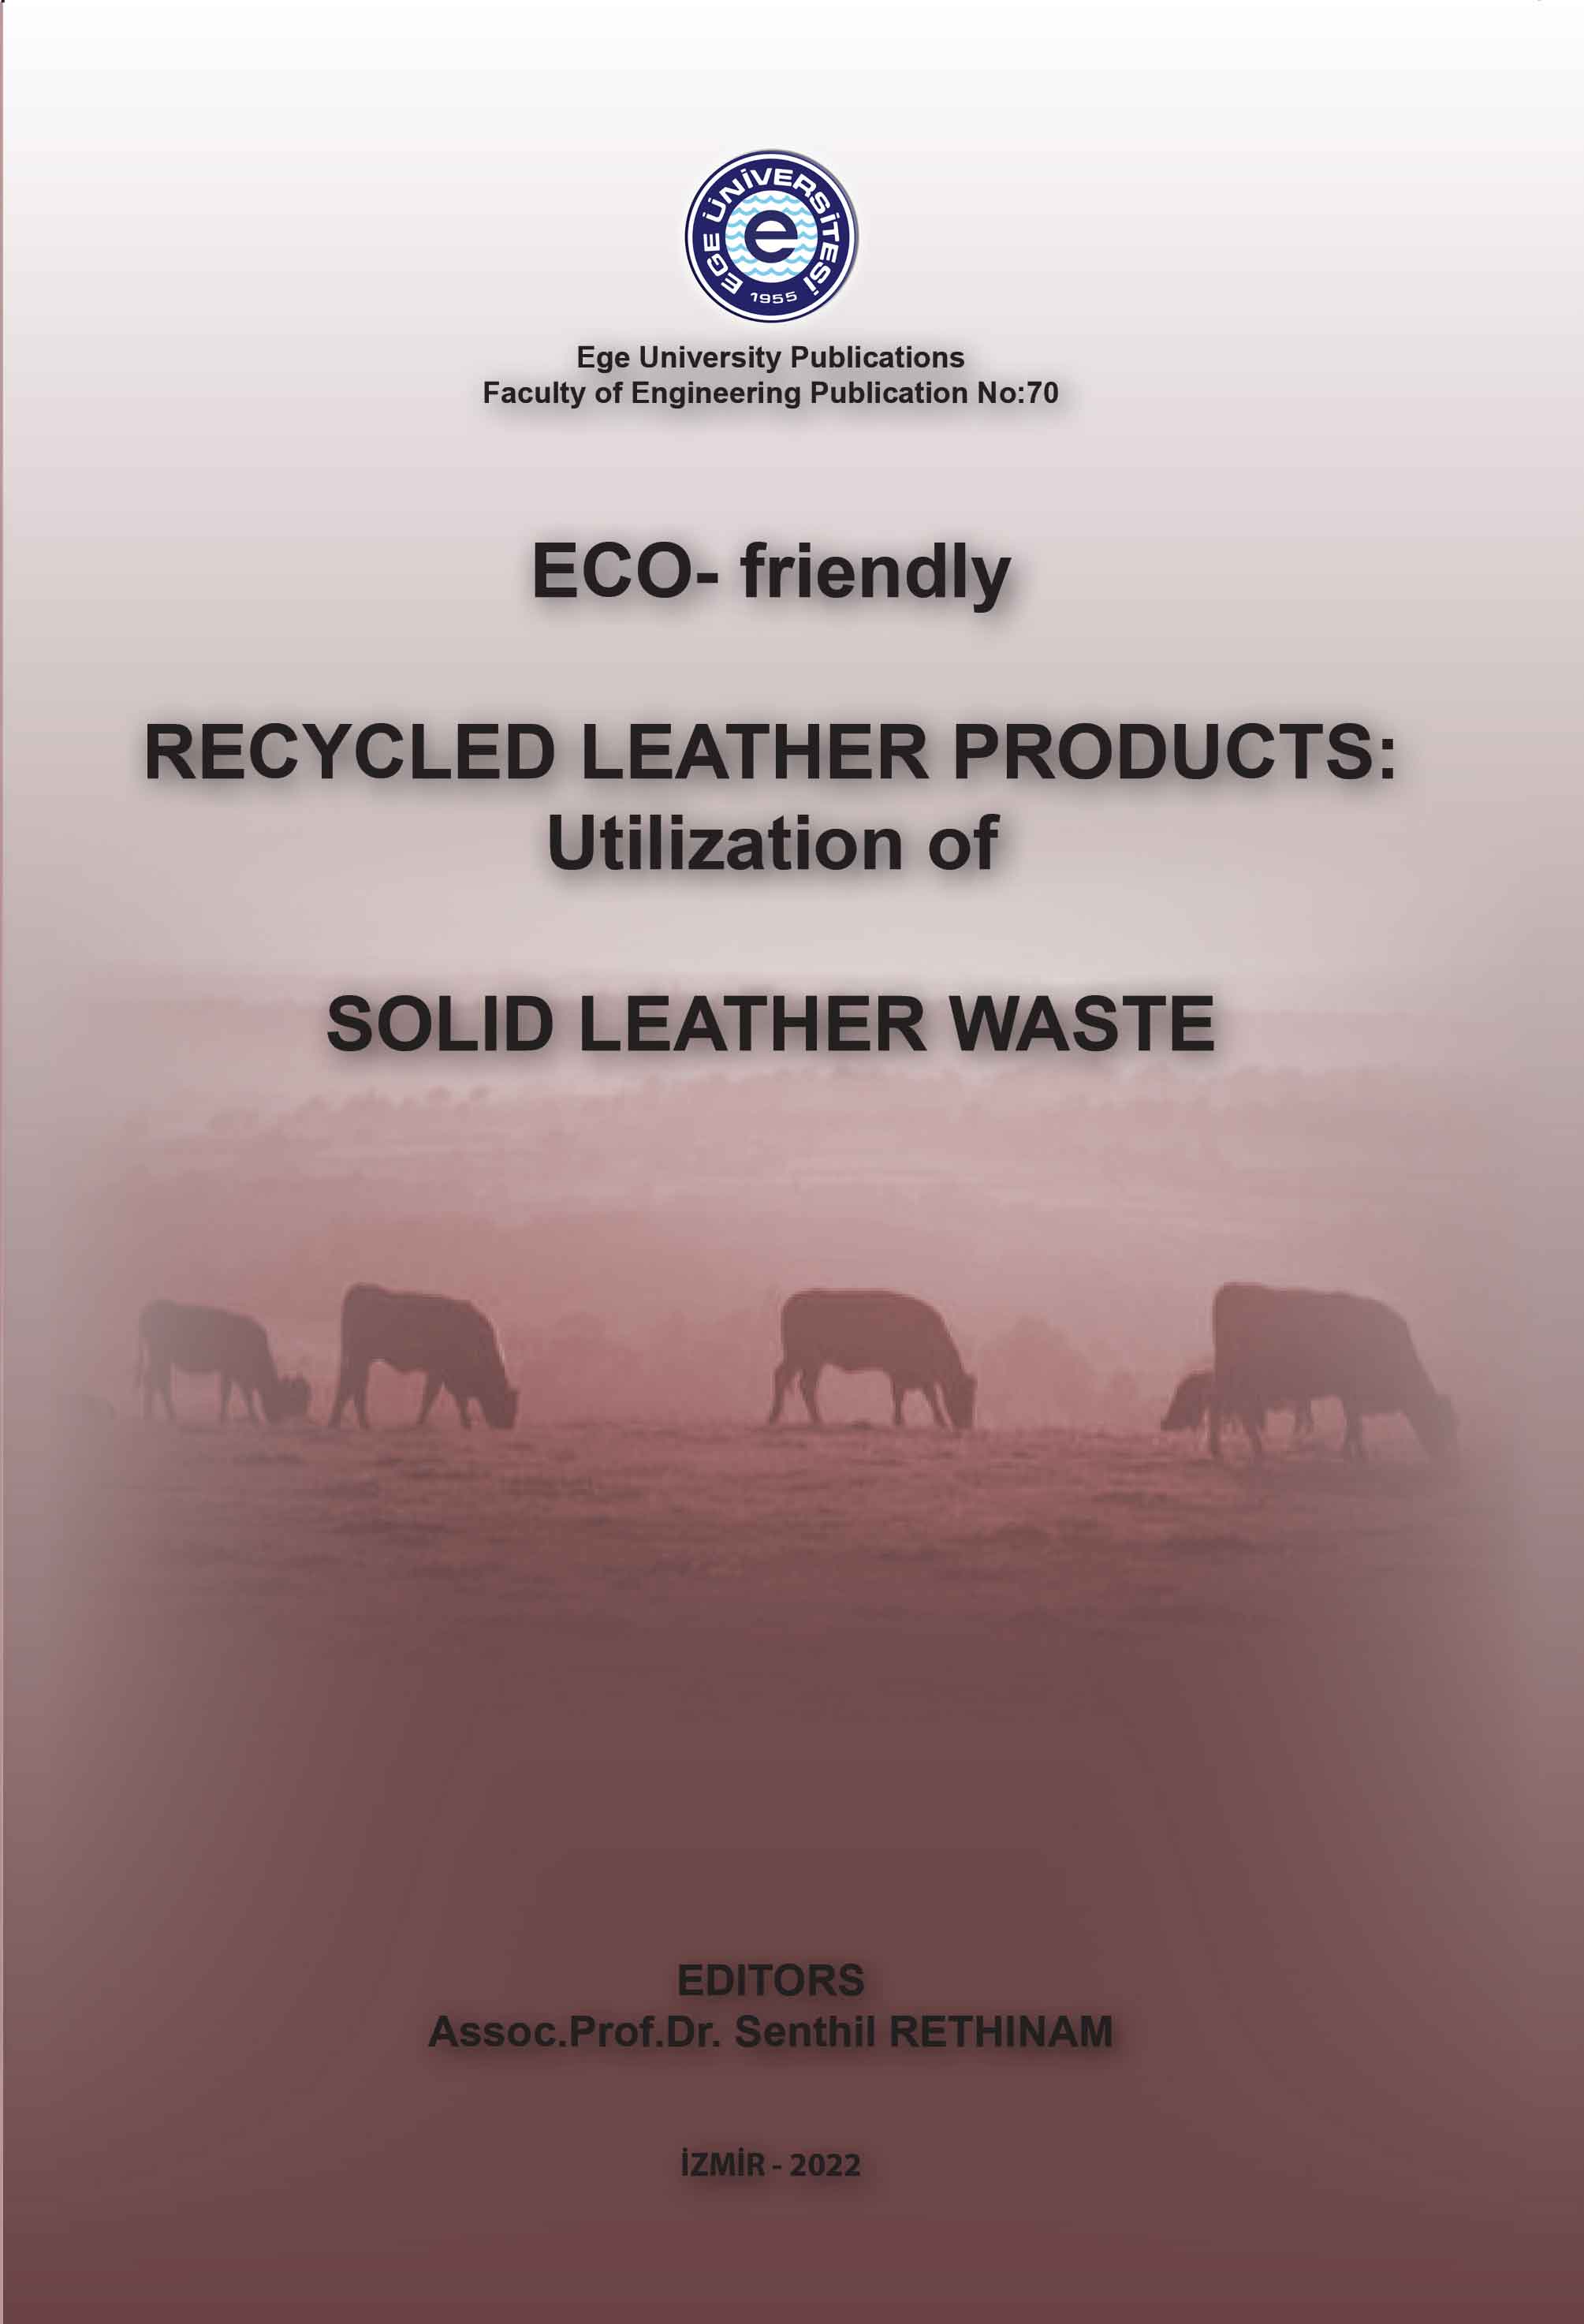 ECO-Frendly Recycled Leather Products: Utilization of Solid Leather Waste